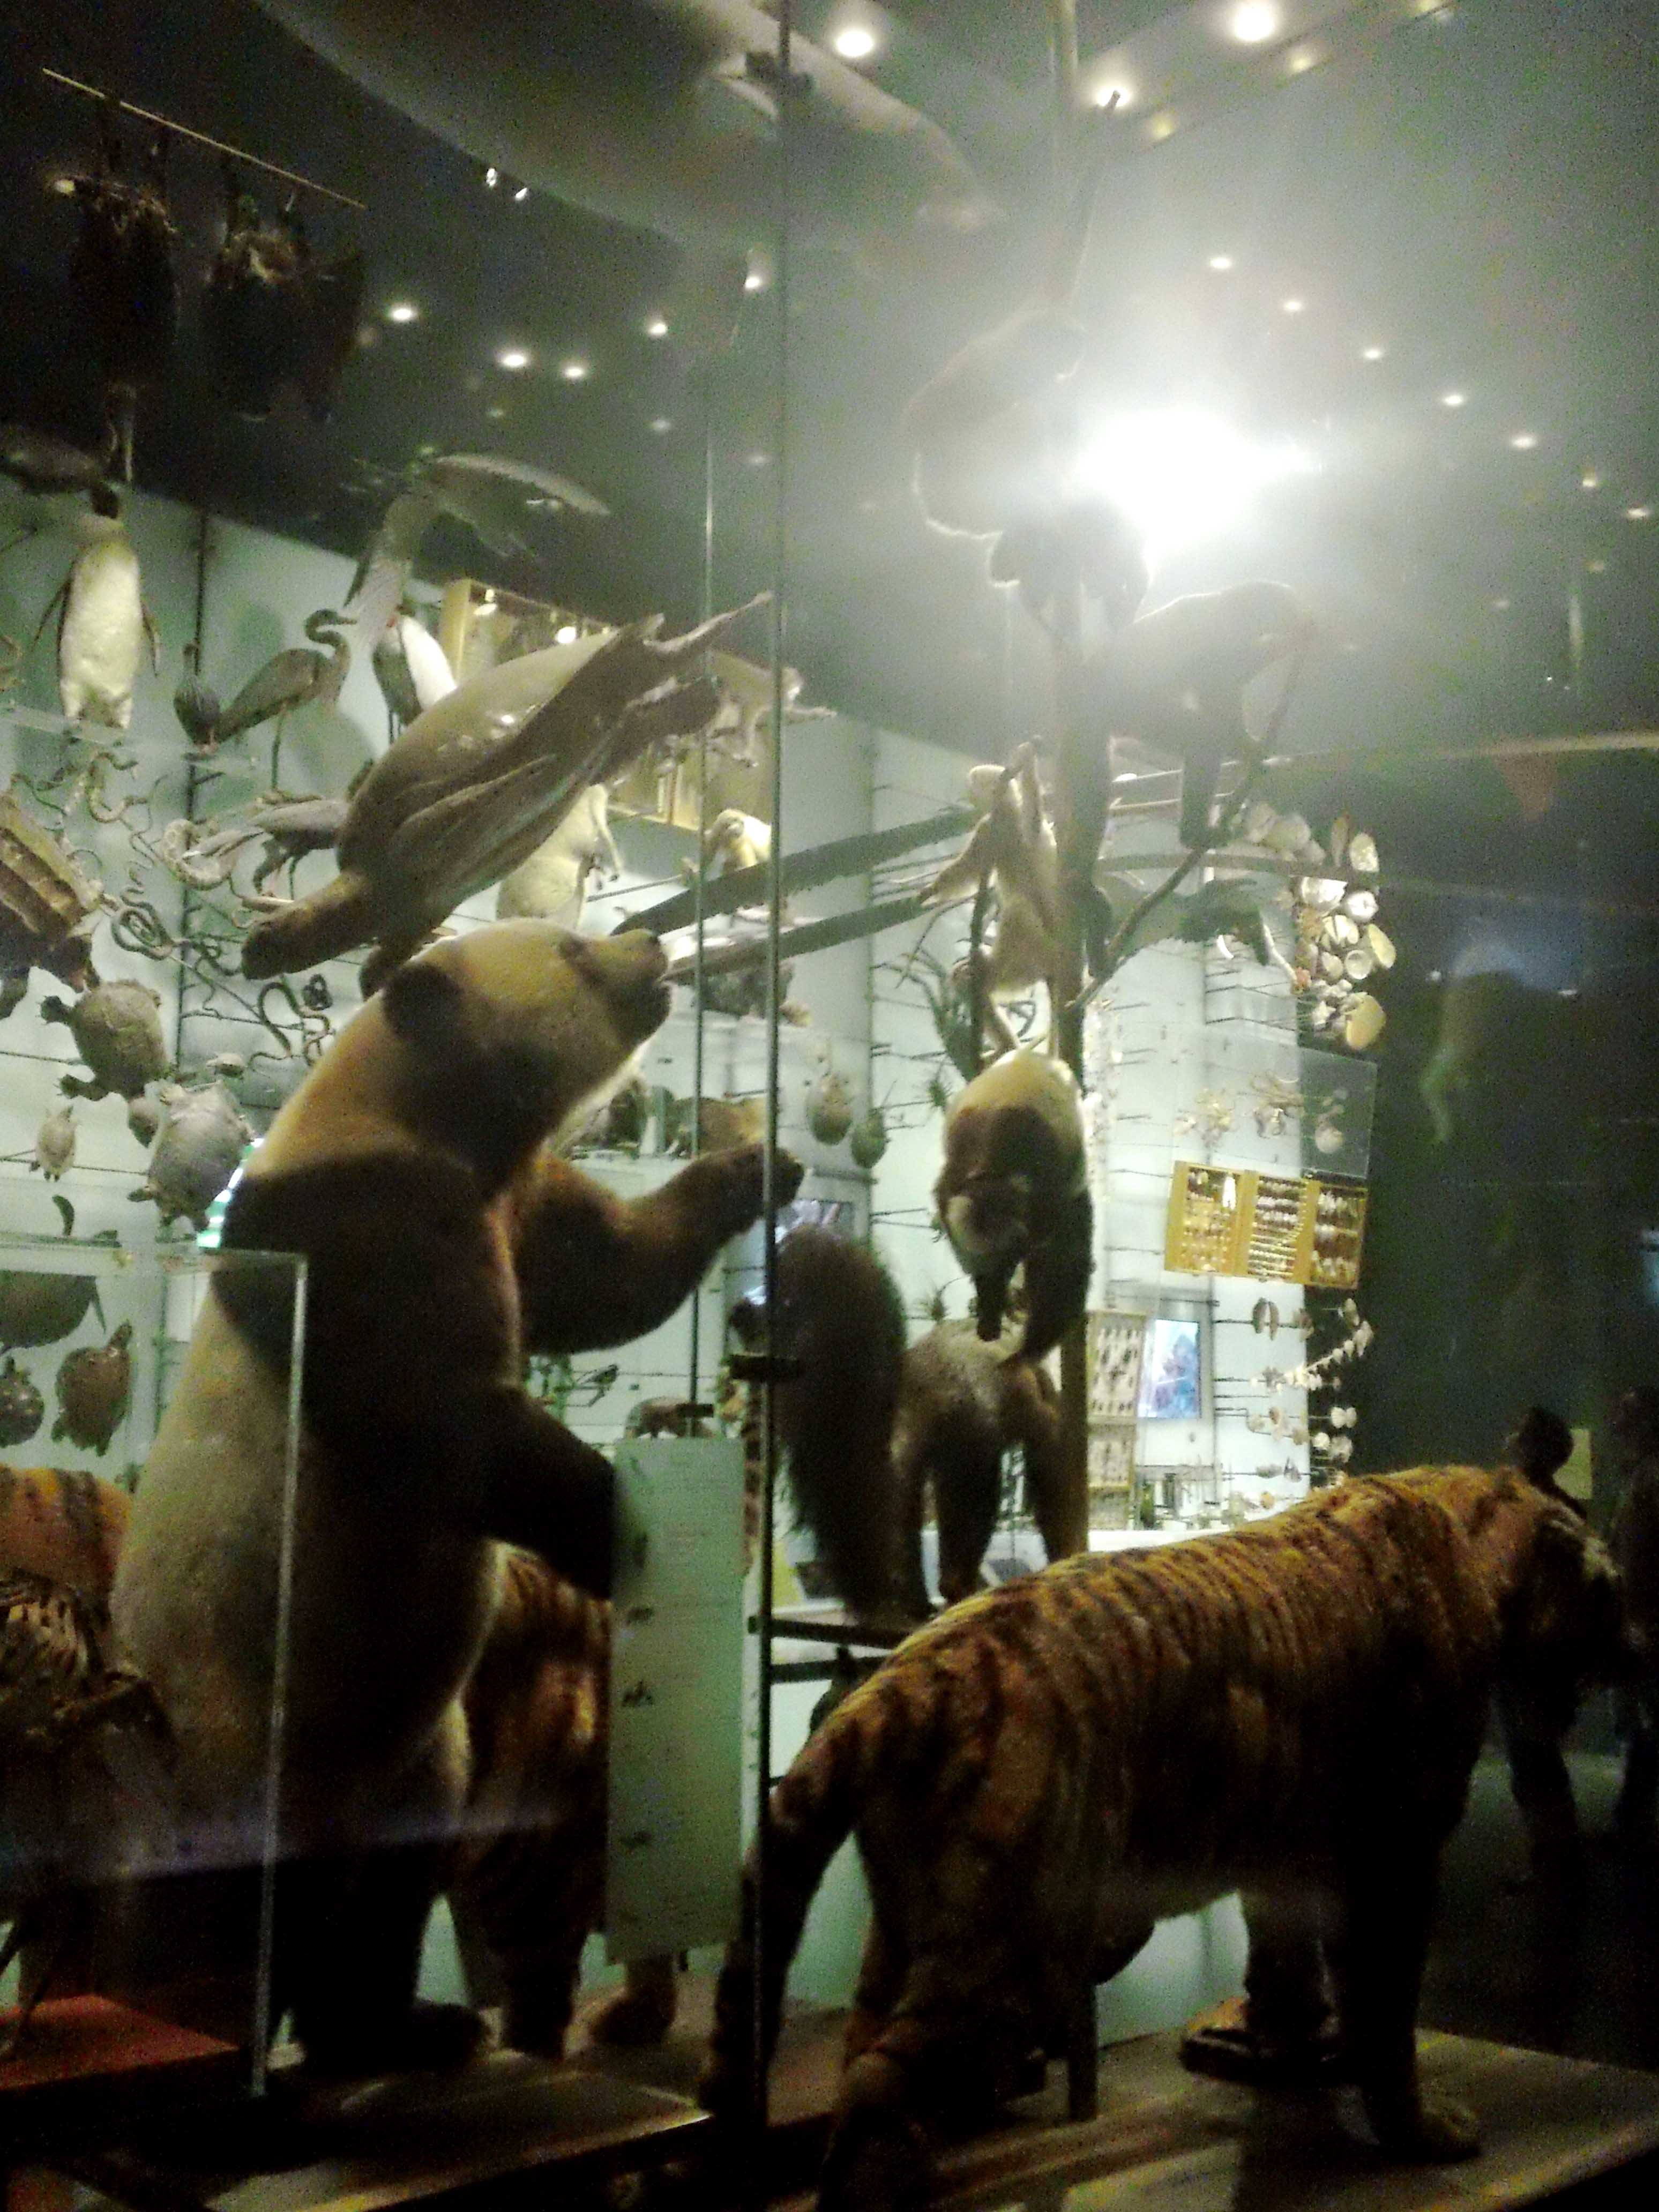 Animal Battle Royale - Atlas Obscura - Natural History Museum NYC